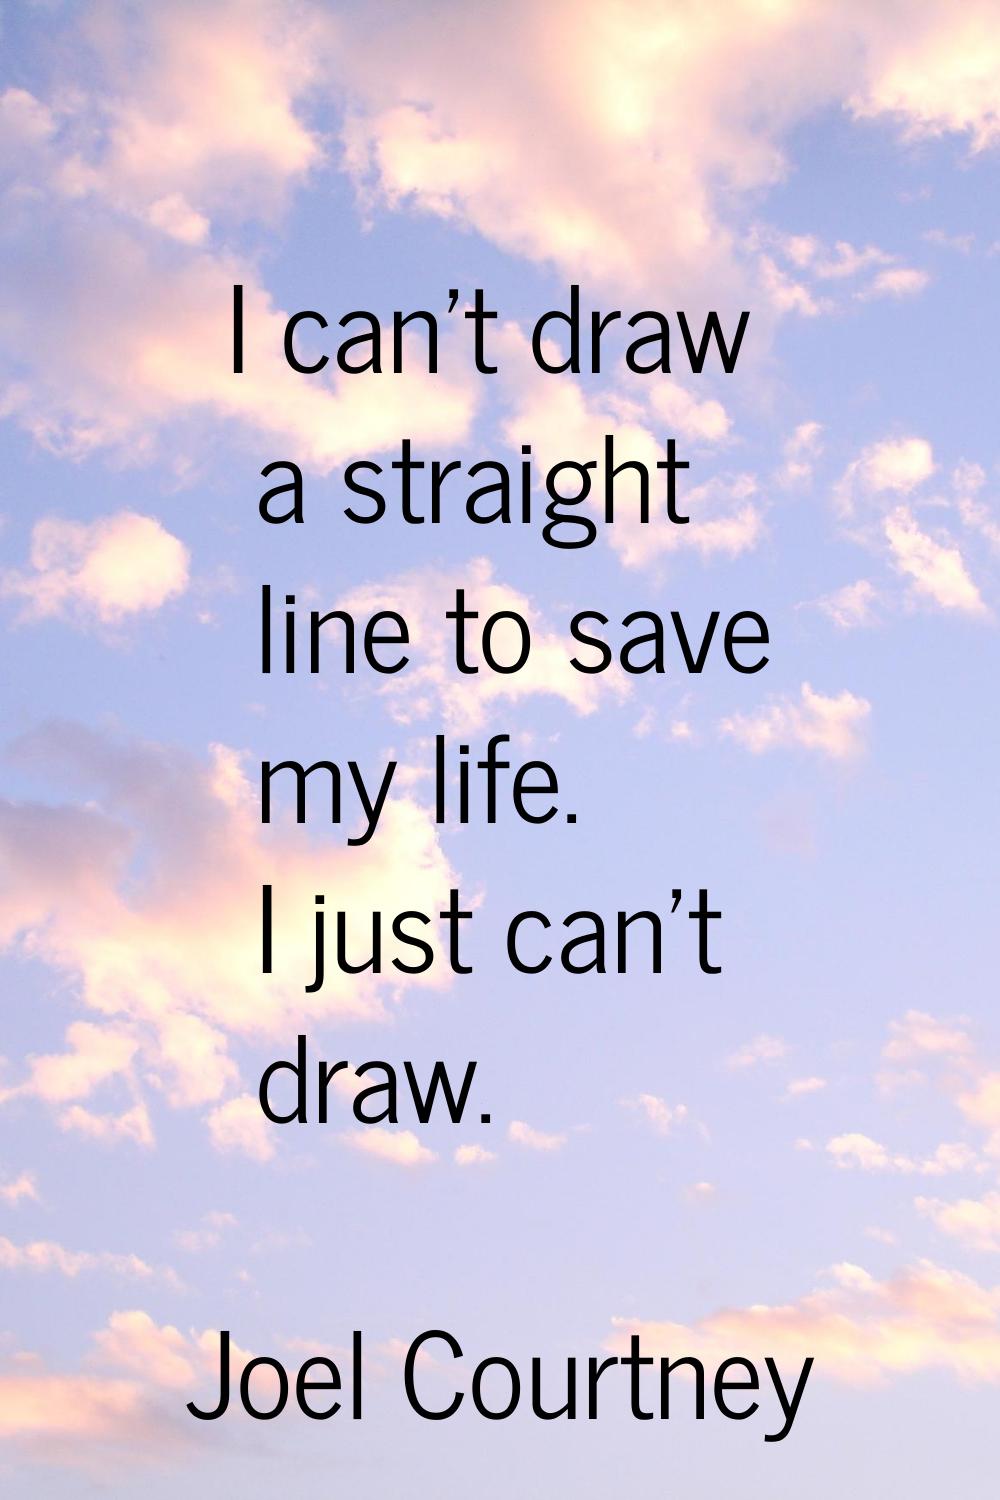 I can't draw a straight line to save my life. I just can't draw.